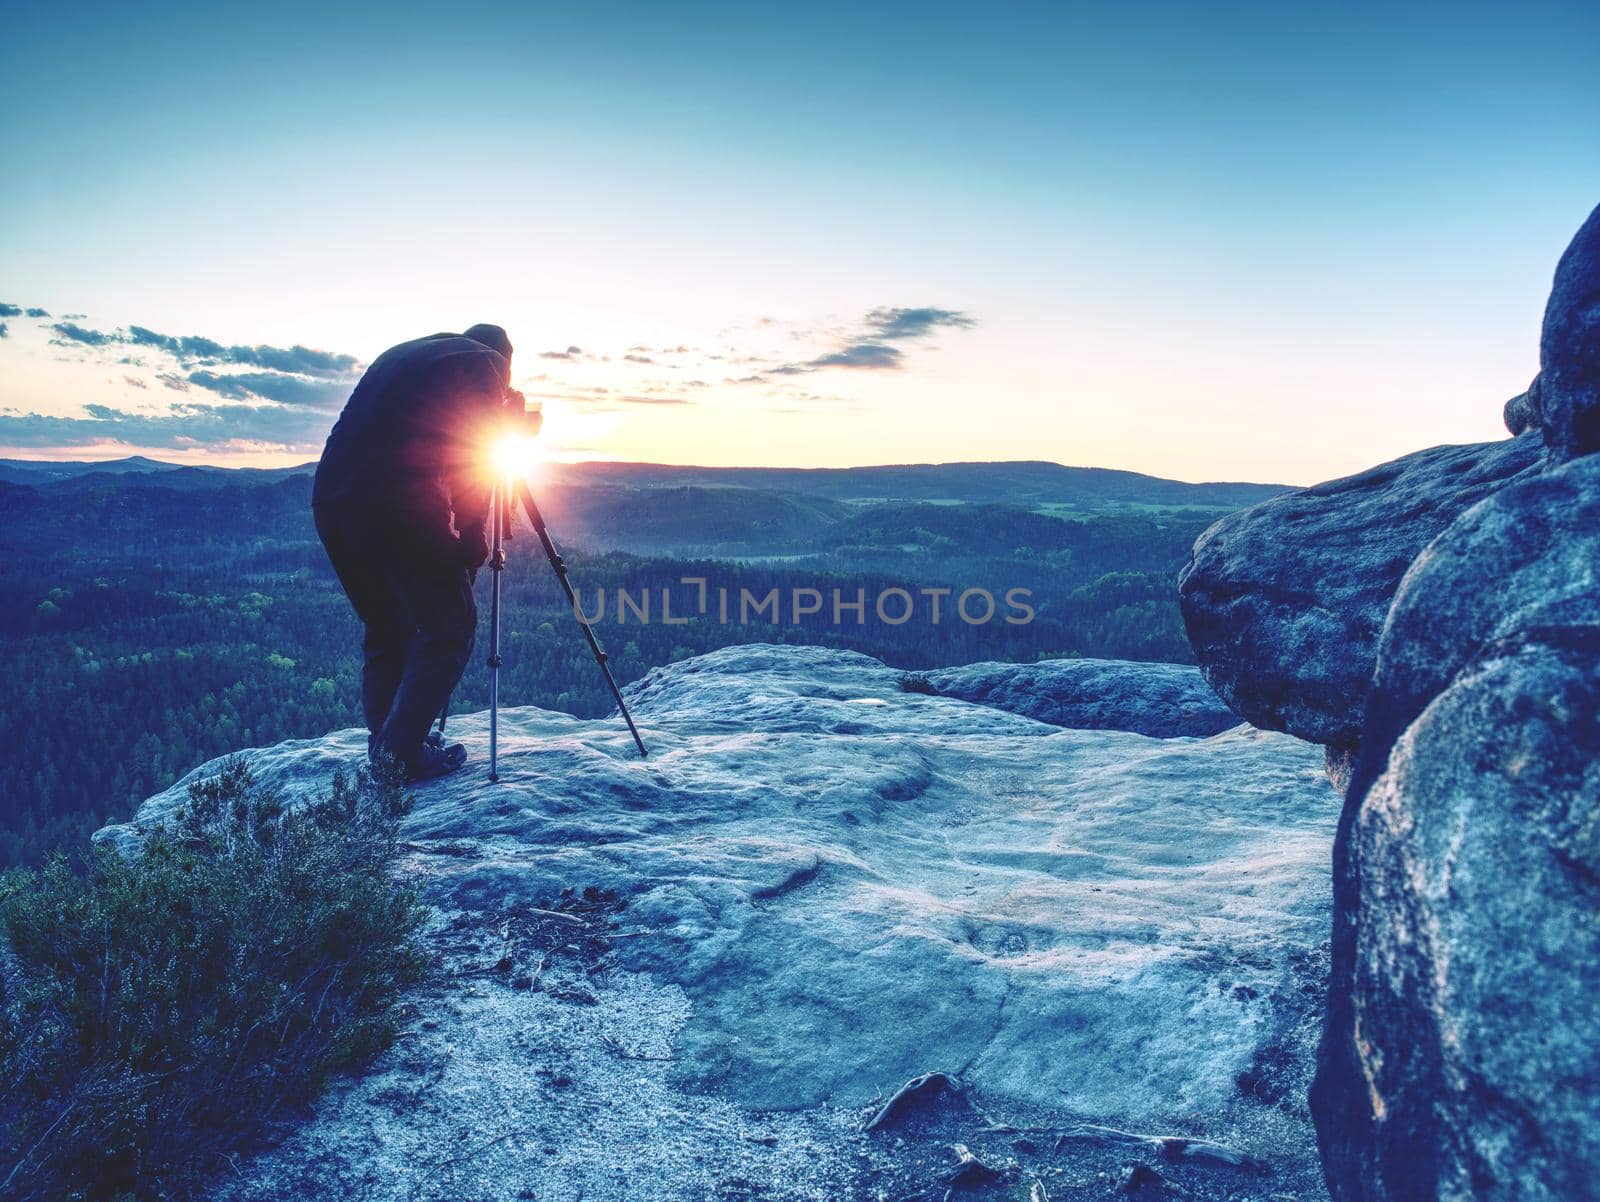 Photographer takes photos with camera on tripod on rock by rdonar2